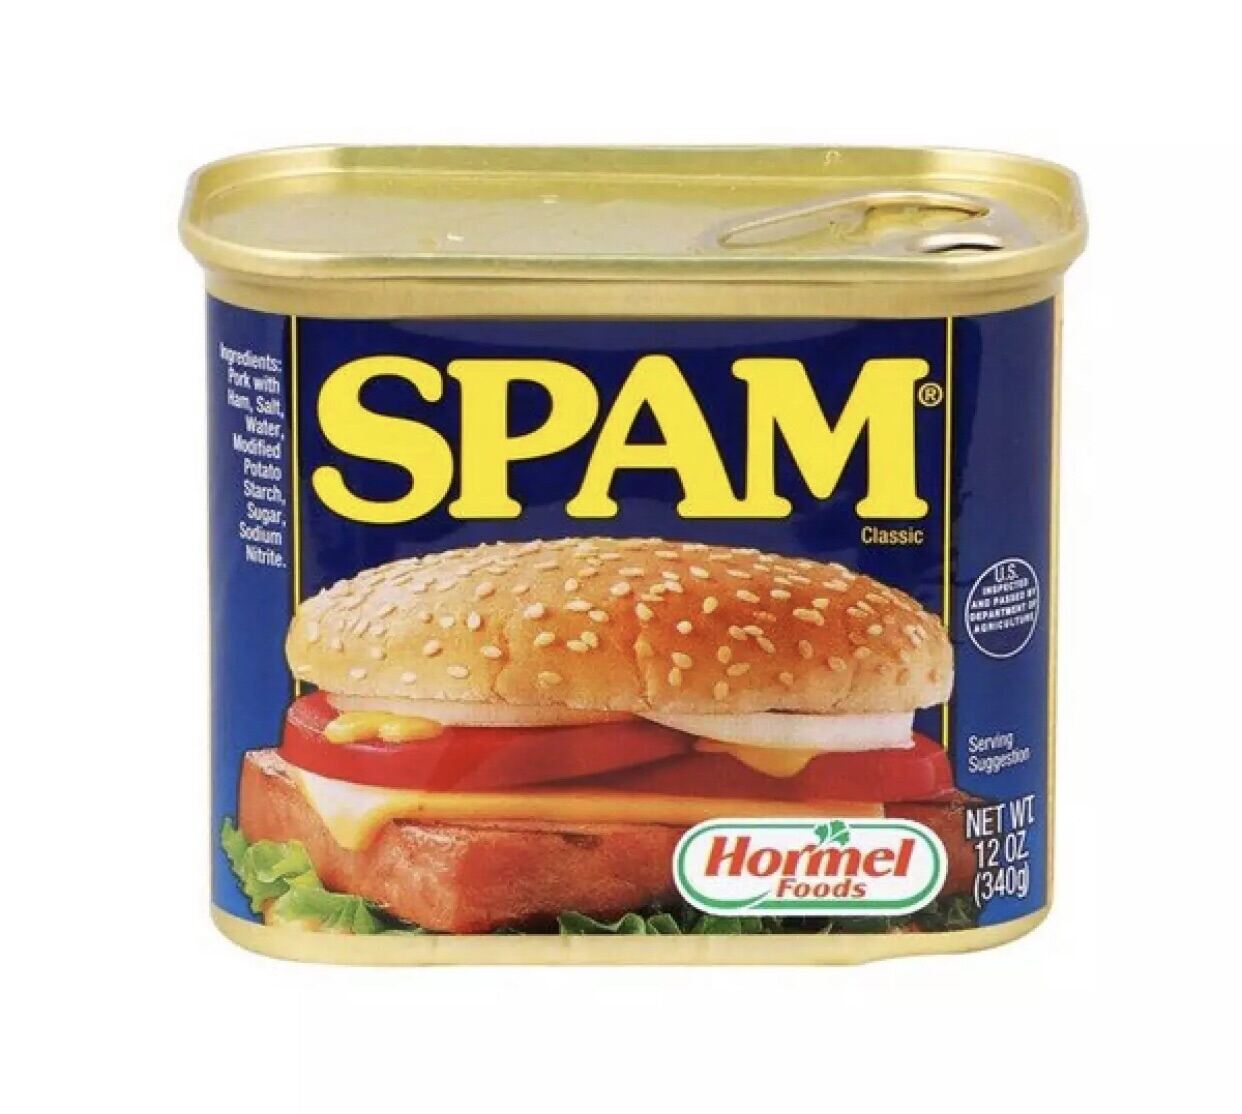 THỊT HỘP SPAM 340G  MADE IN USA